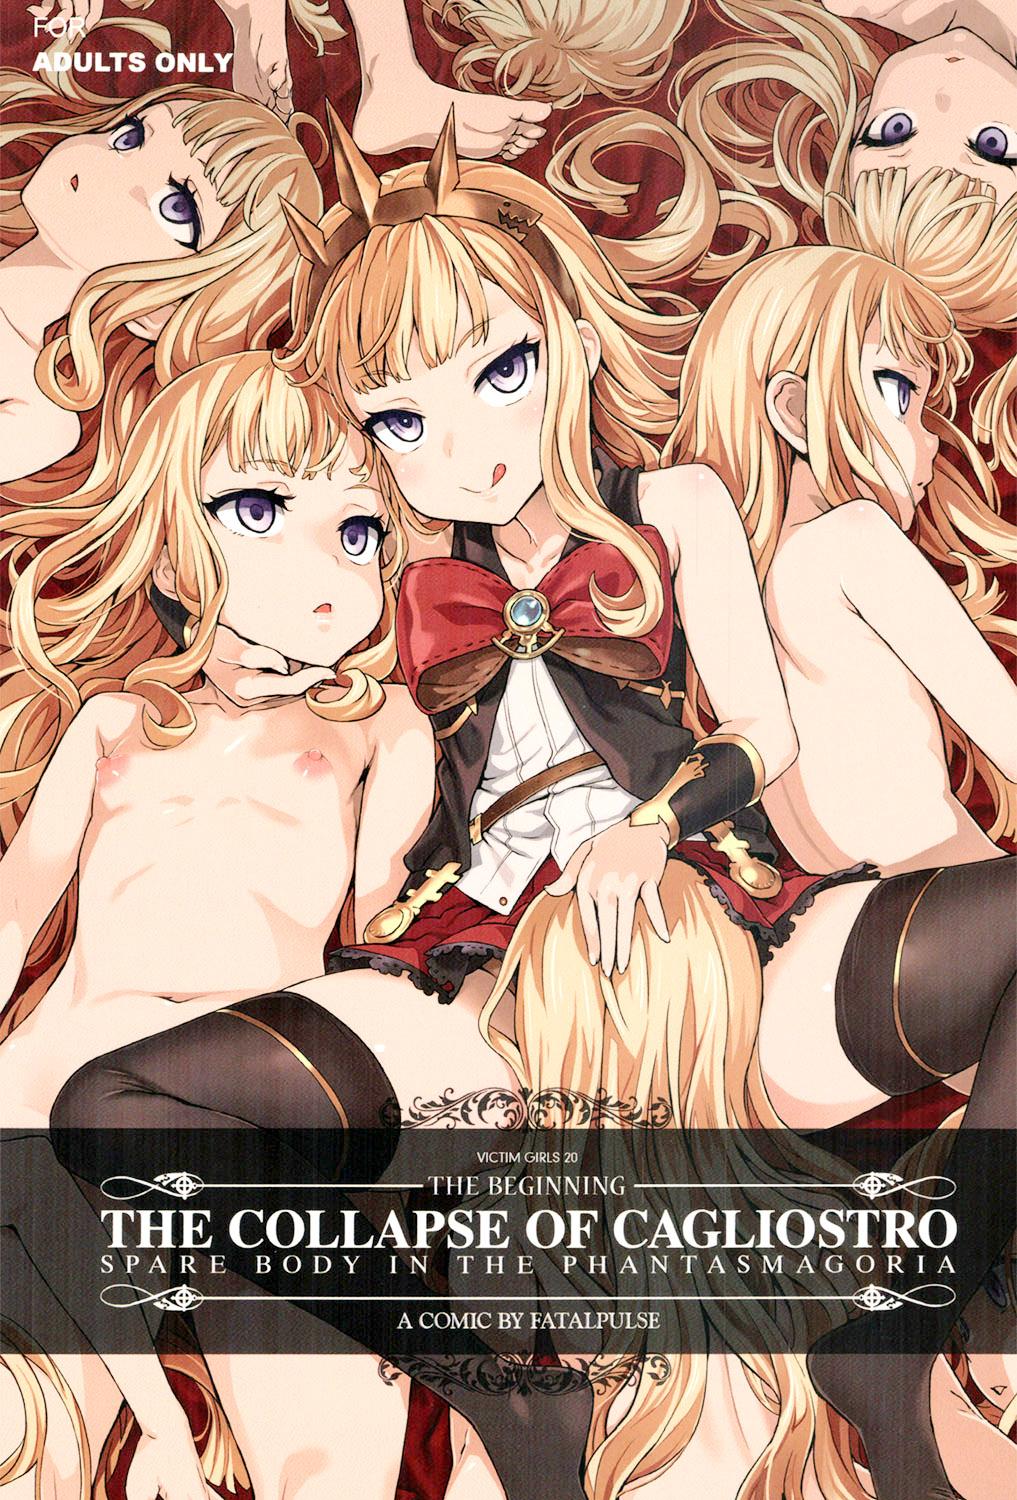 Cam Sex Victim Girls 20 THE COLLAPSE OF CAGLIOSTRO - Granblue fantasy Gay Deepthroat - Page 2